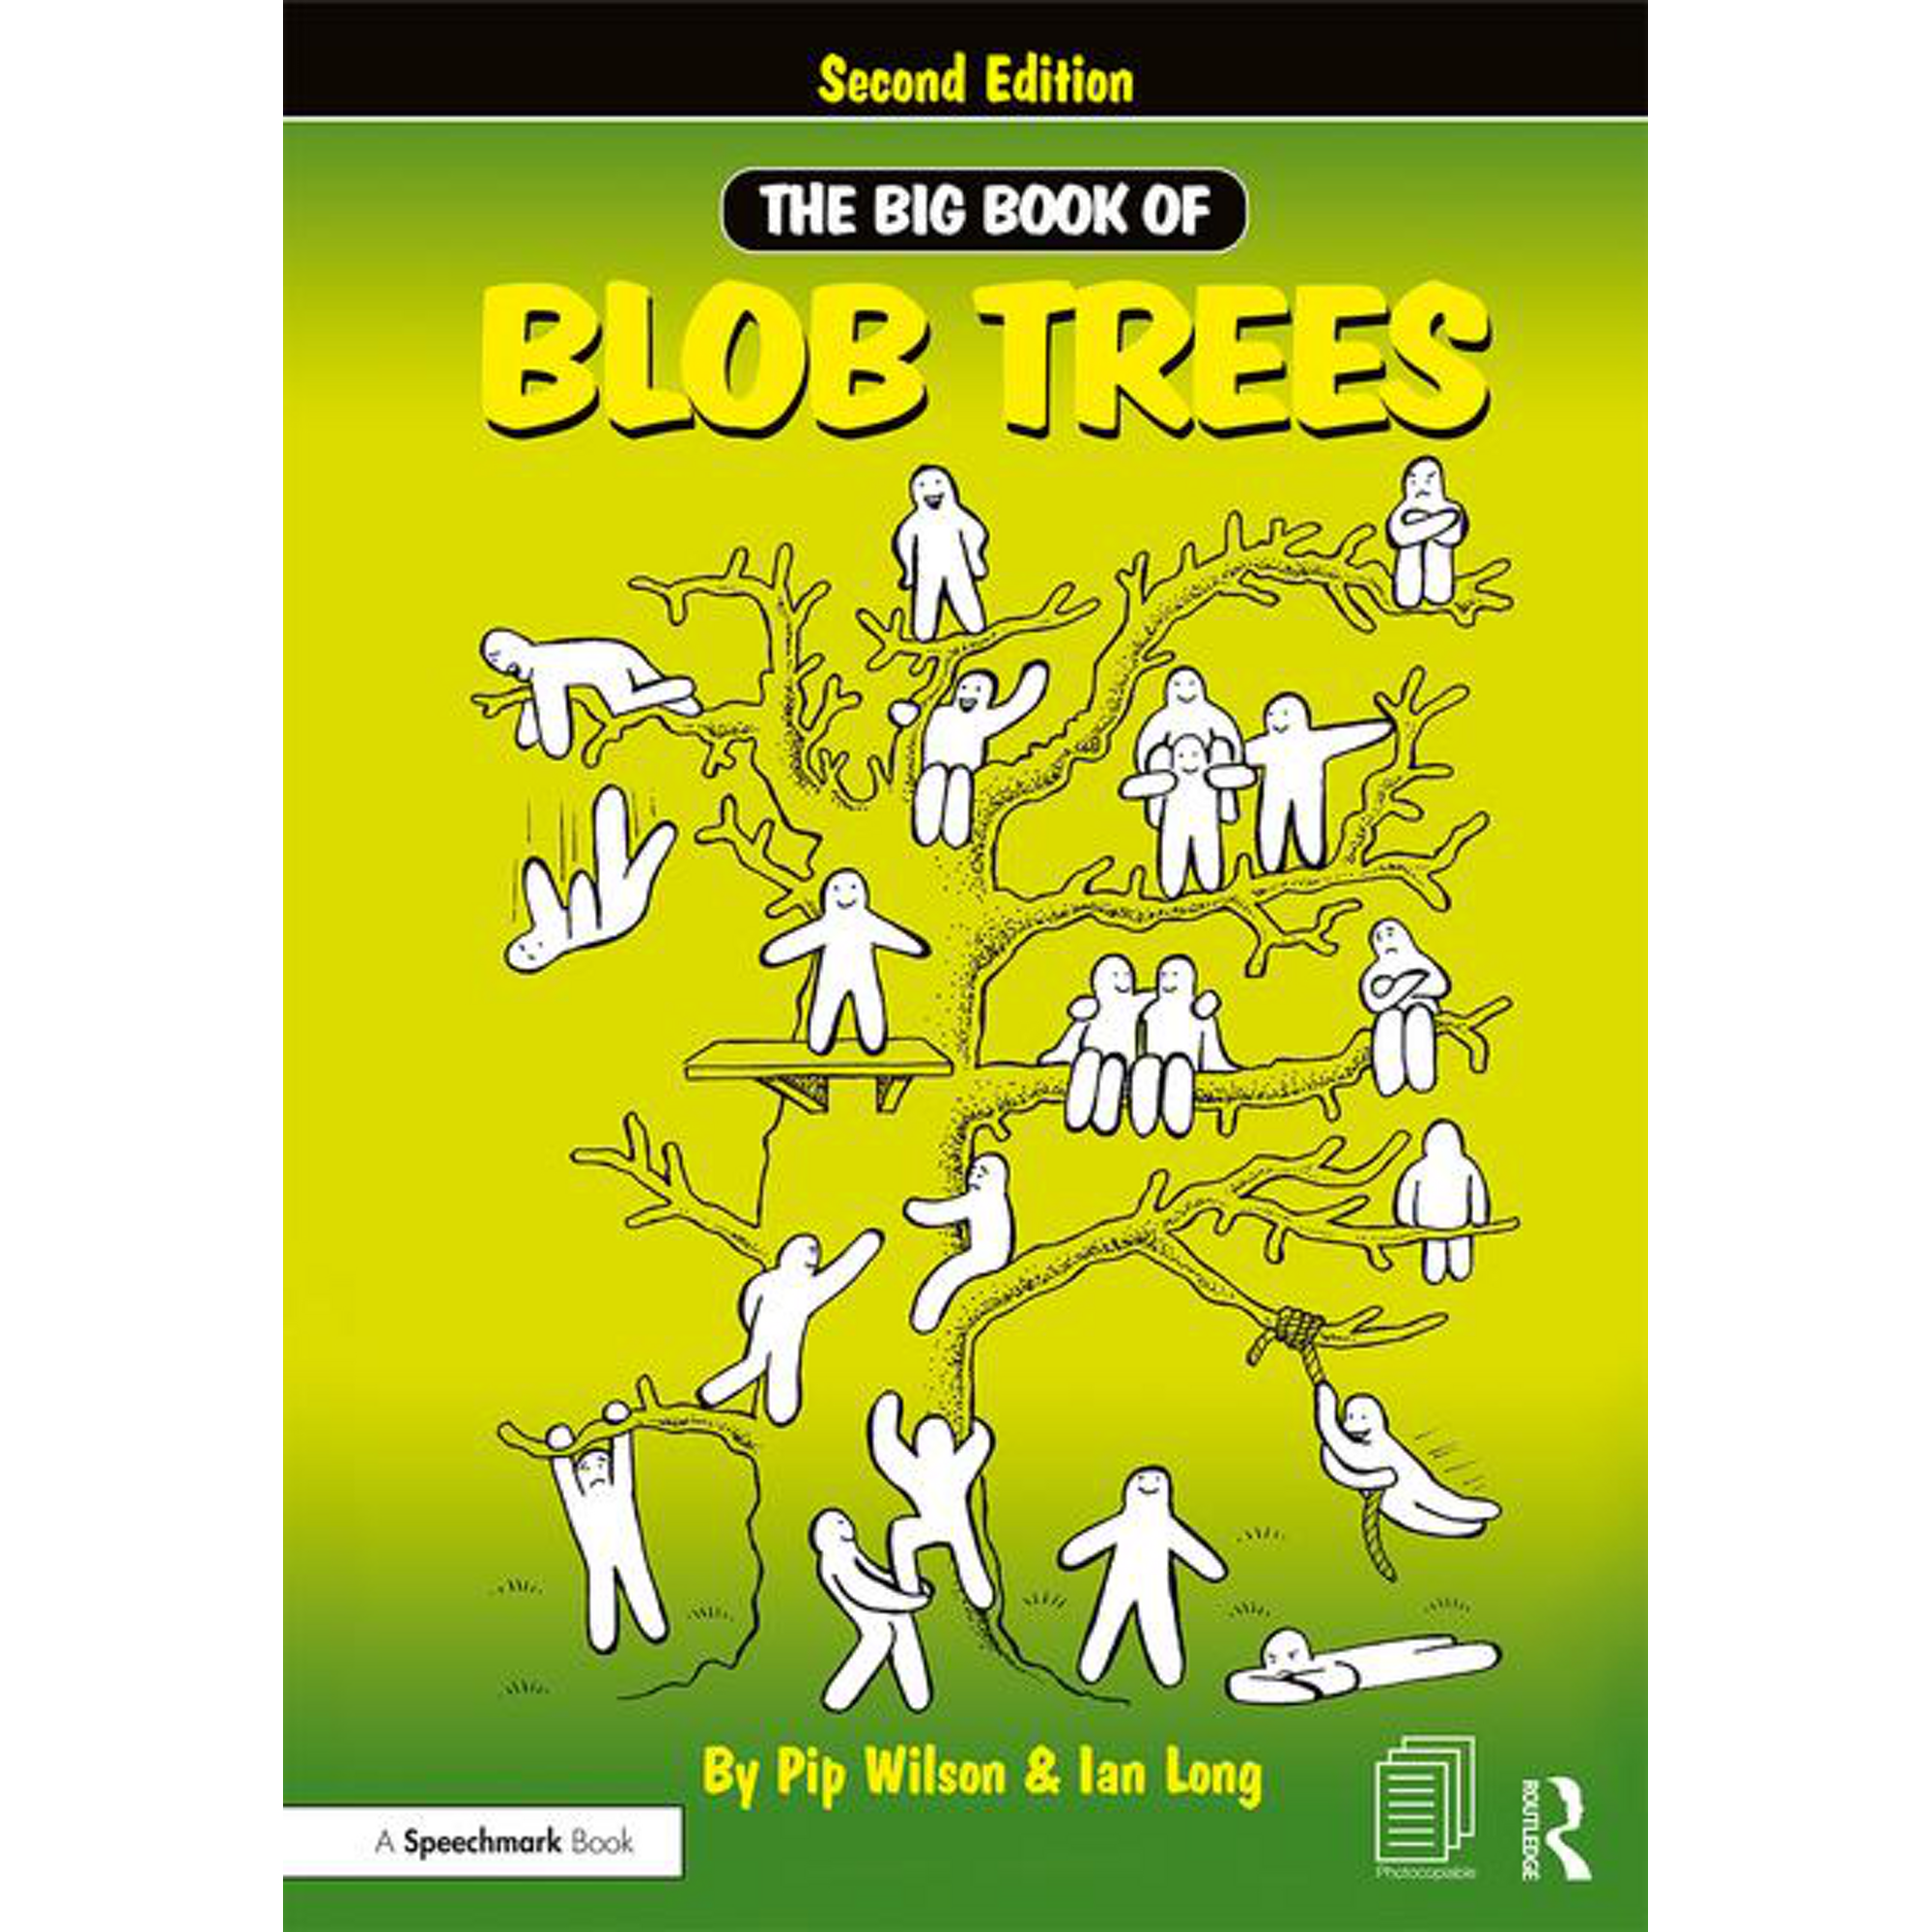 The Book Of Blob Trees